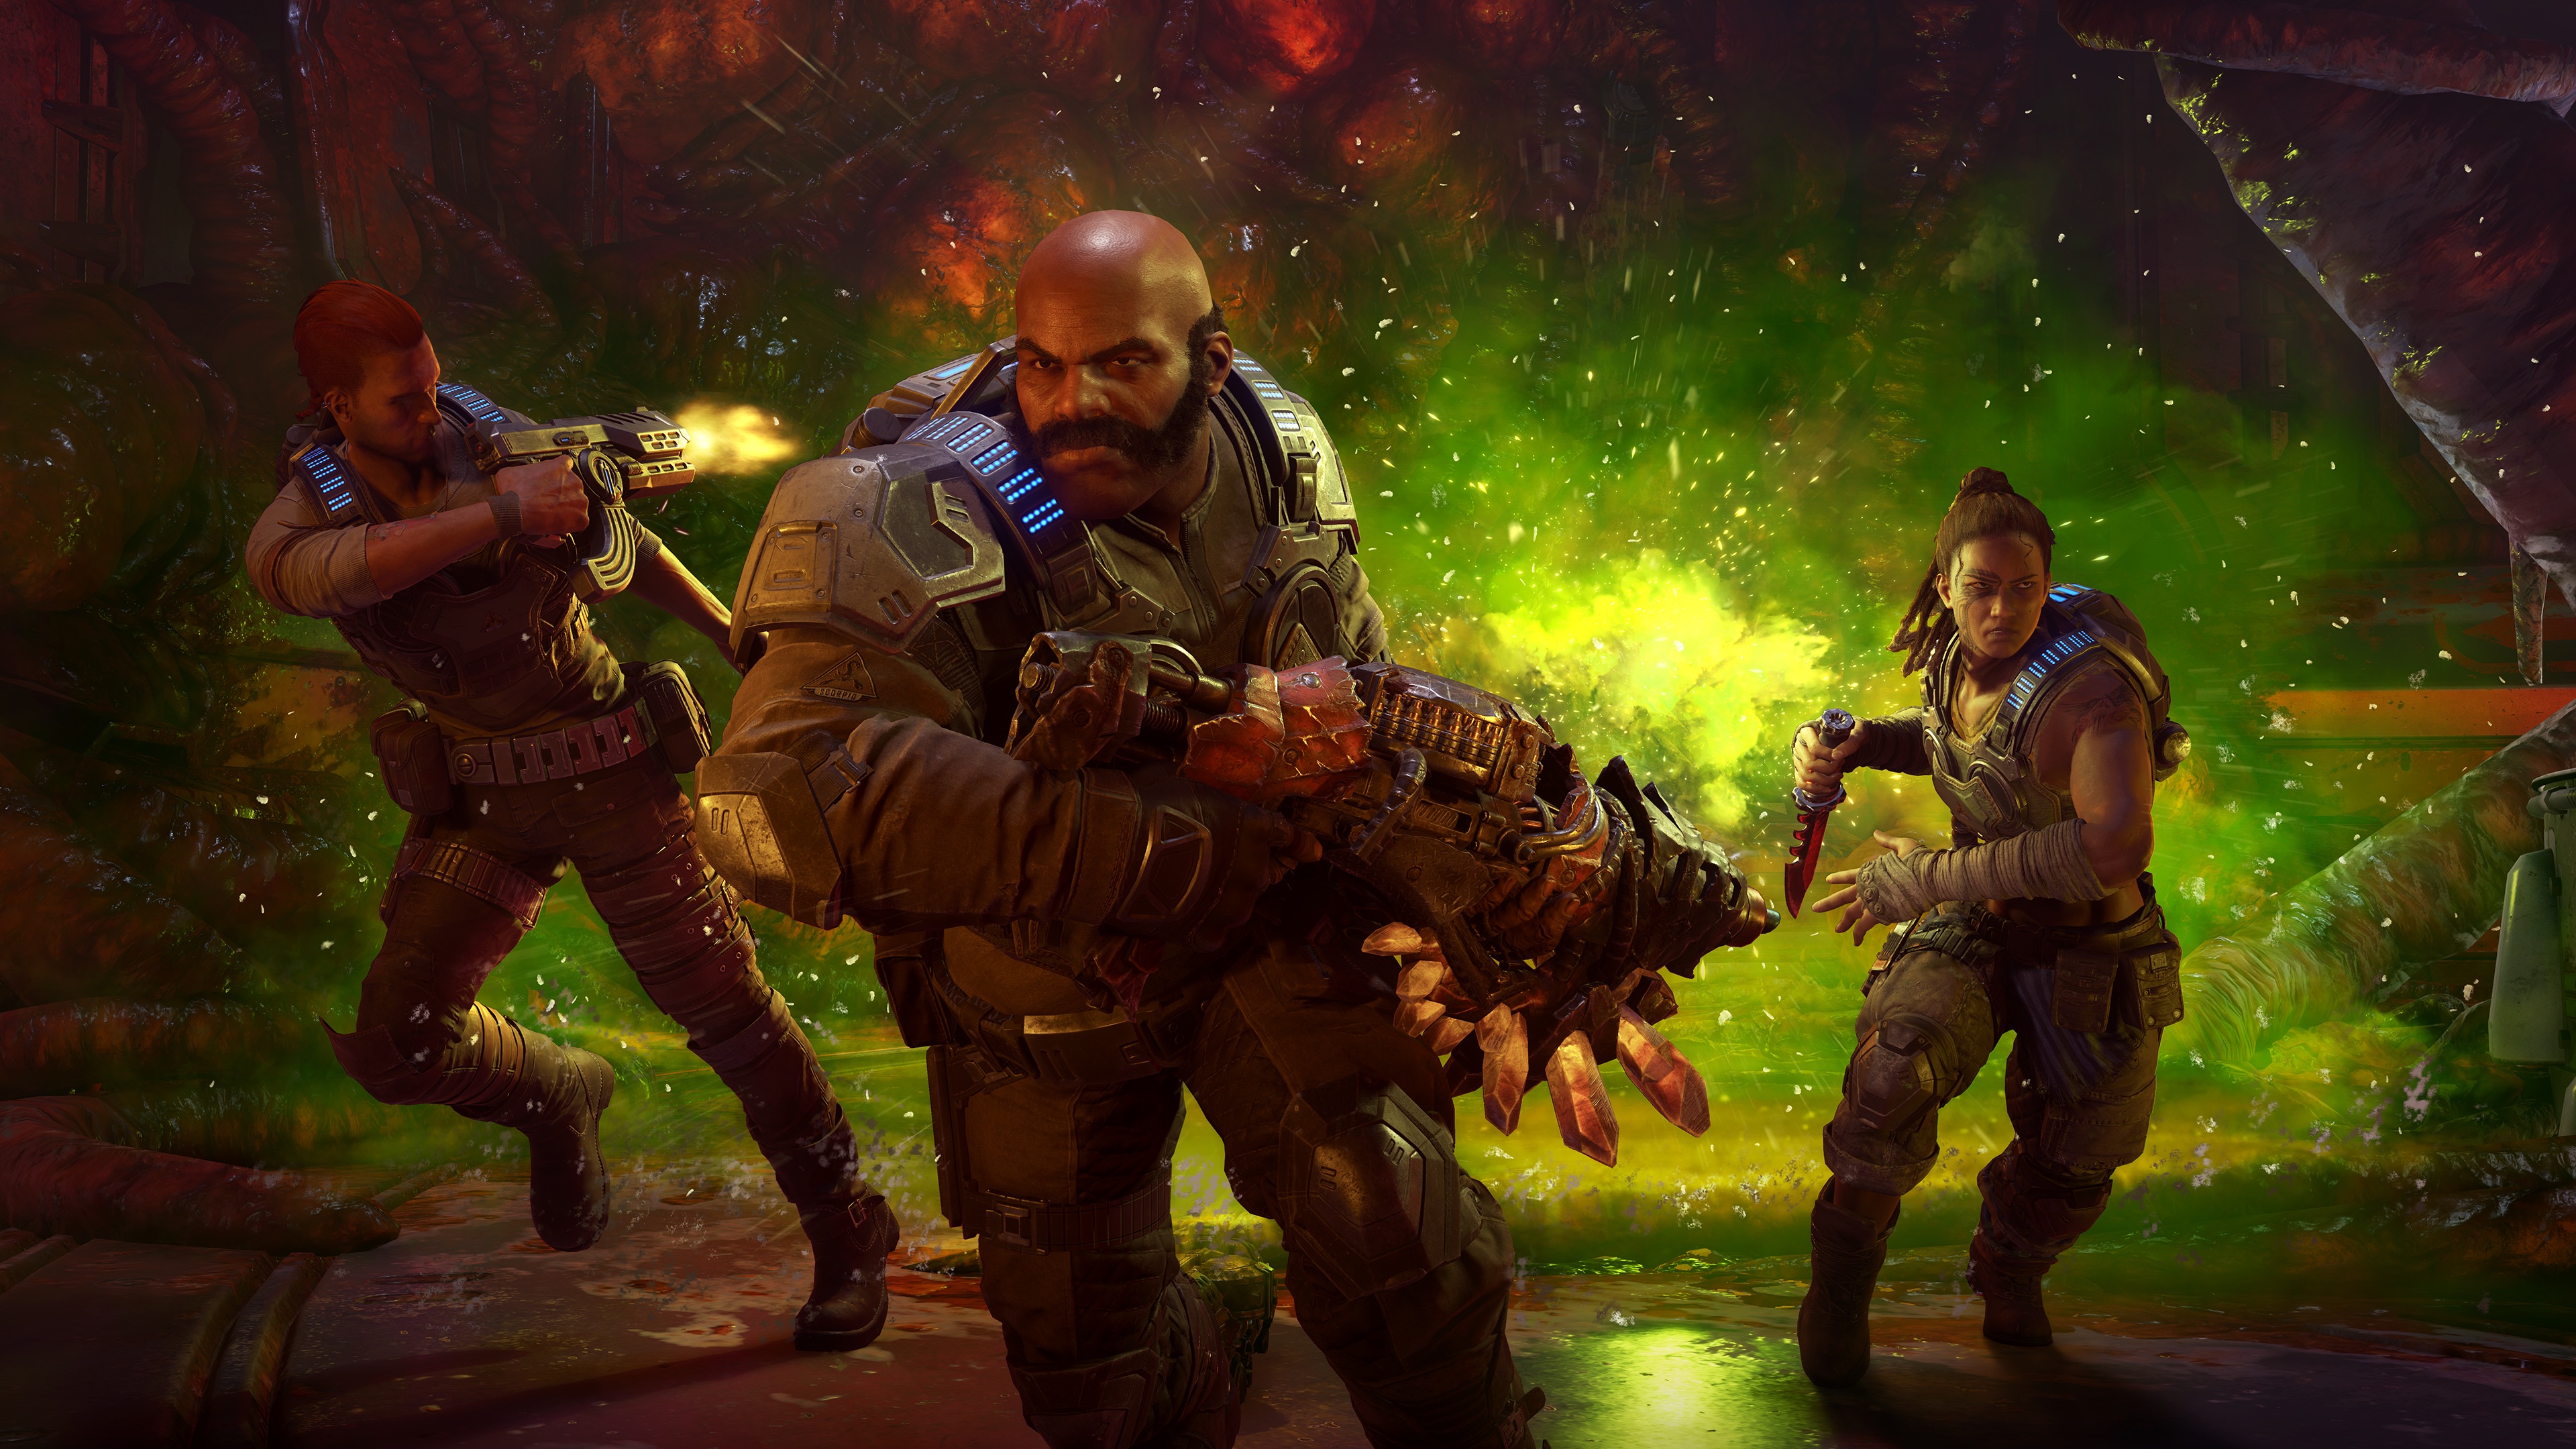 Gears 5 Escape is the least entertaining part of the game, but